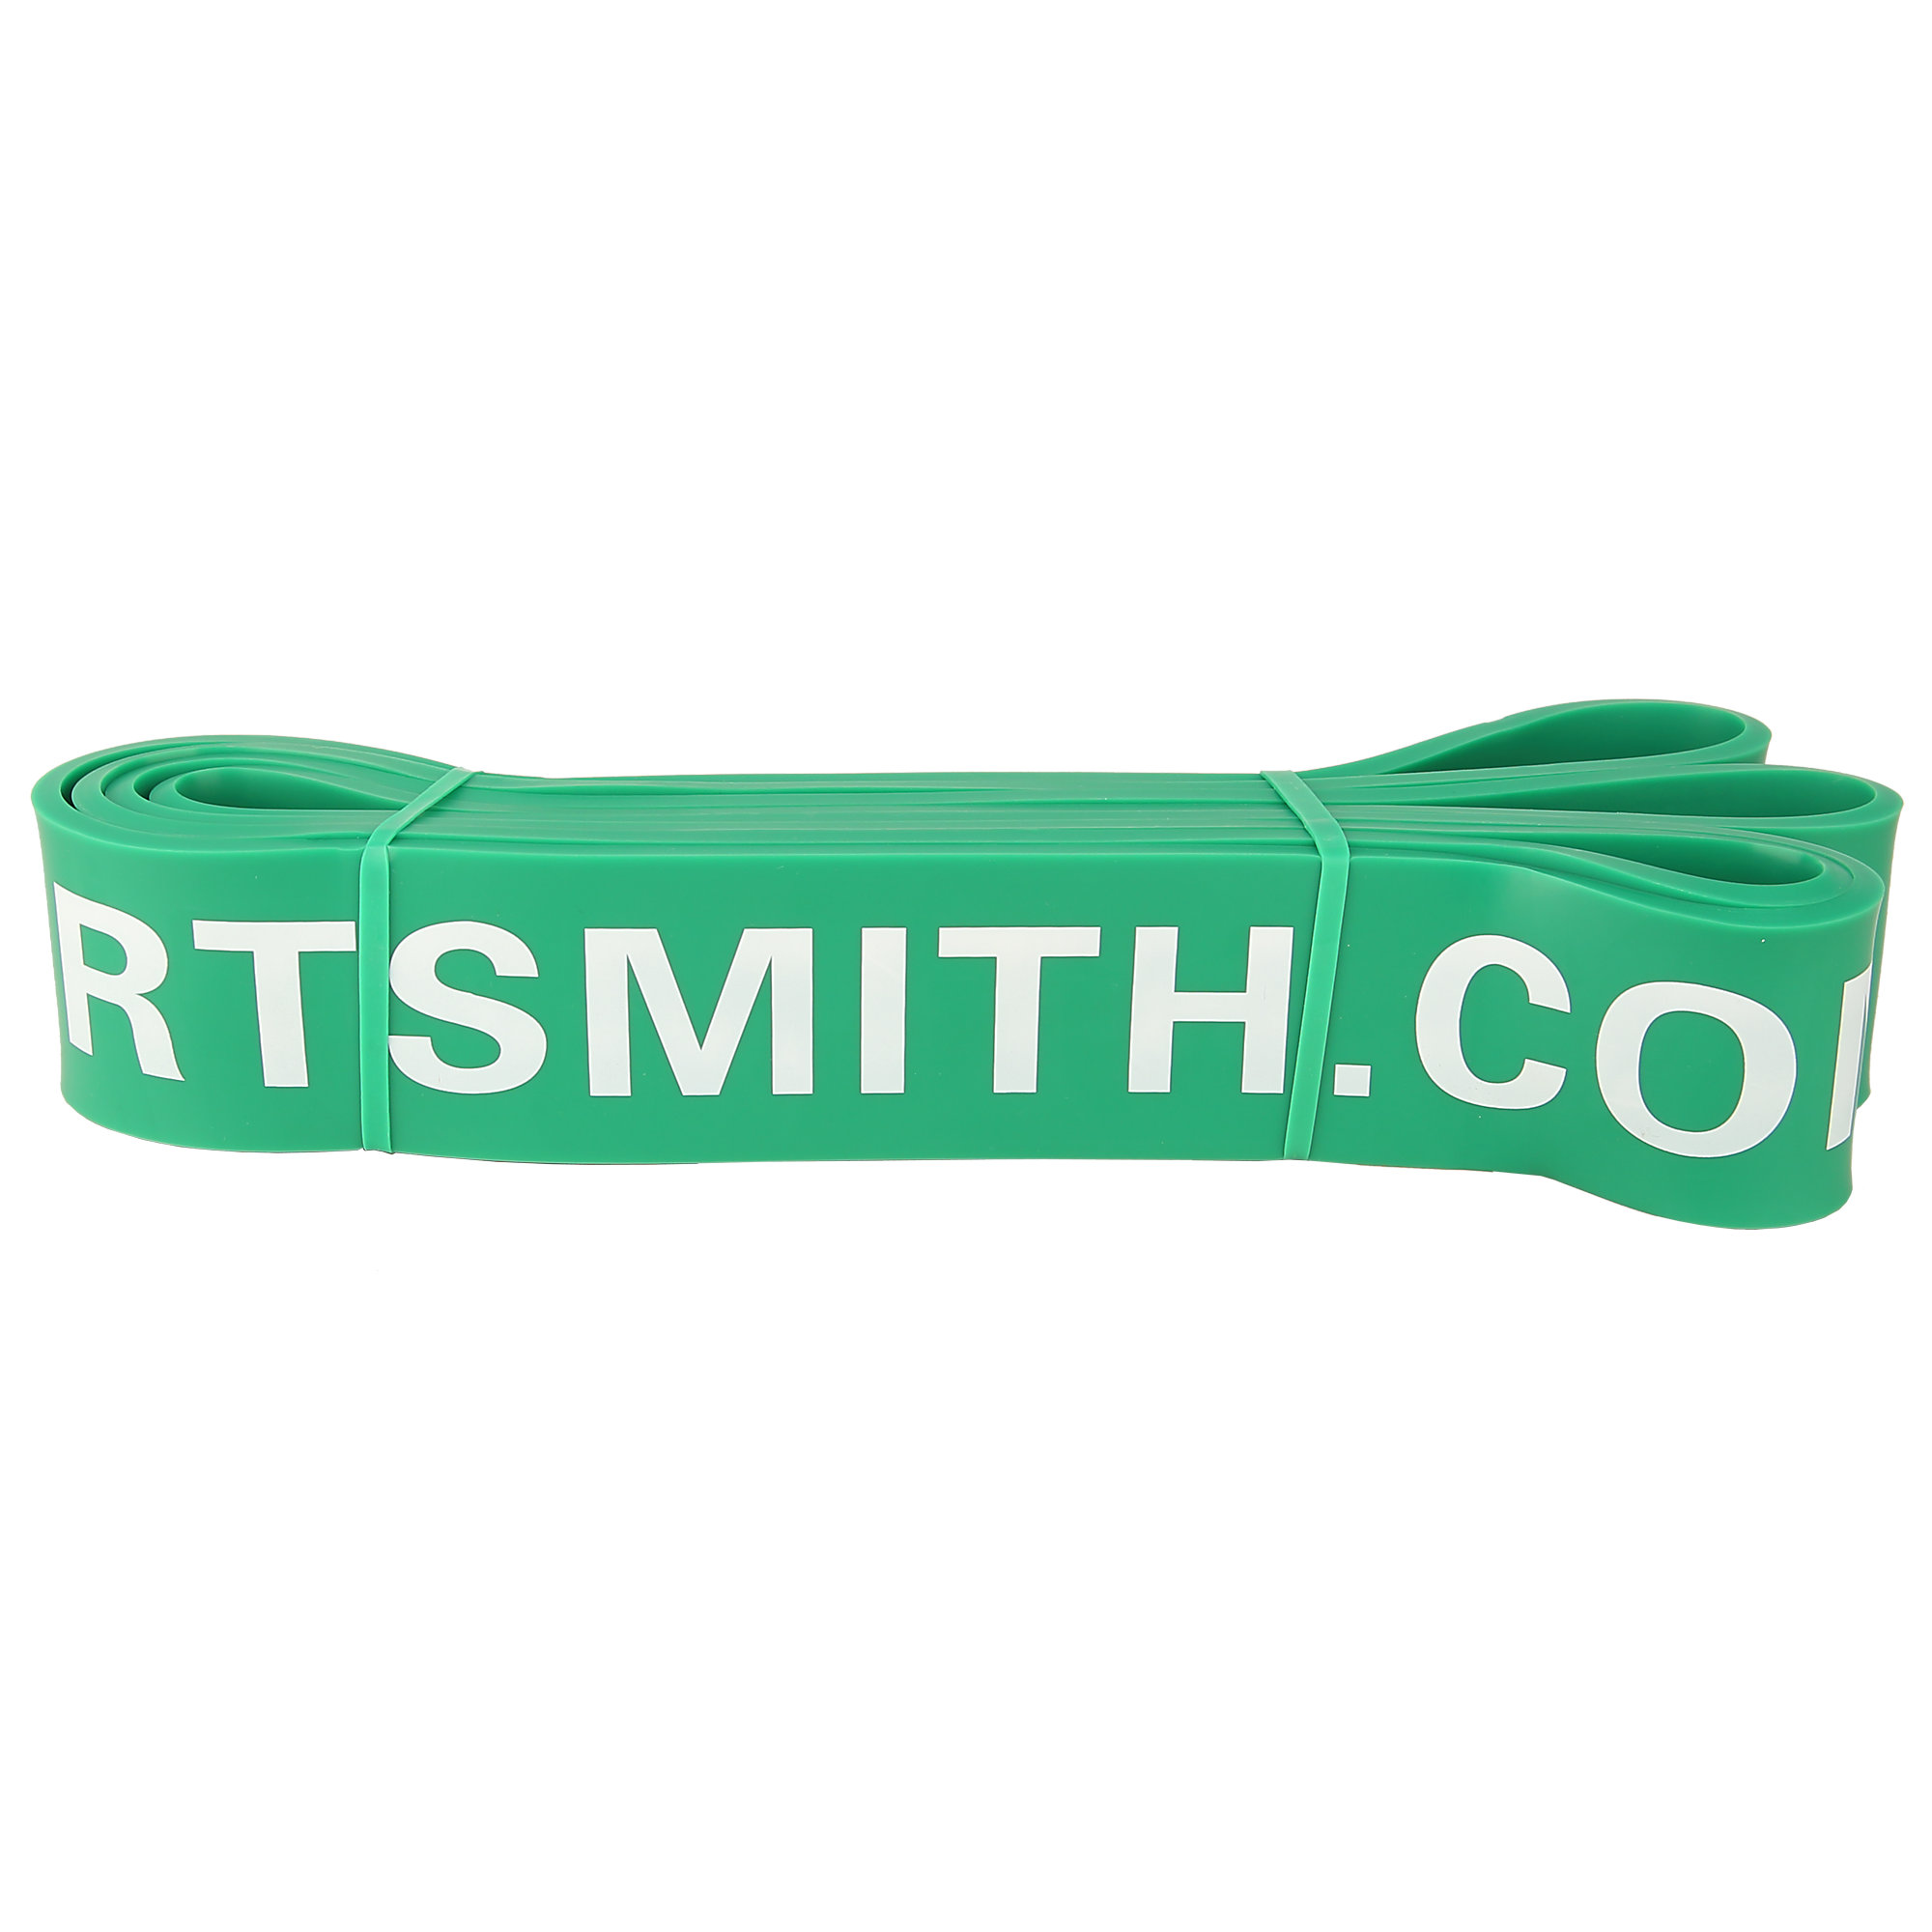 Medium Power Resistance Band by Sportsmith, 41", Green